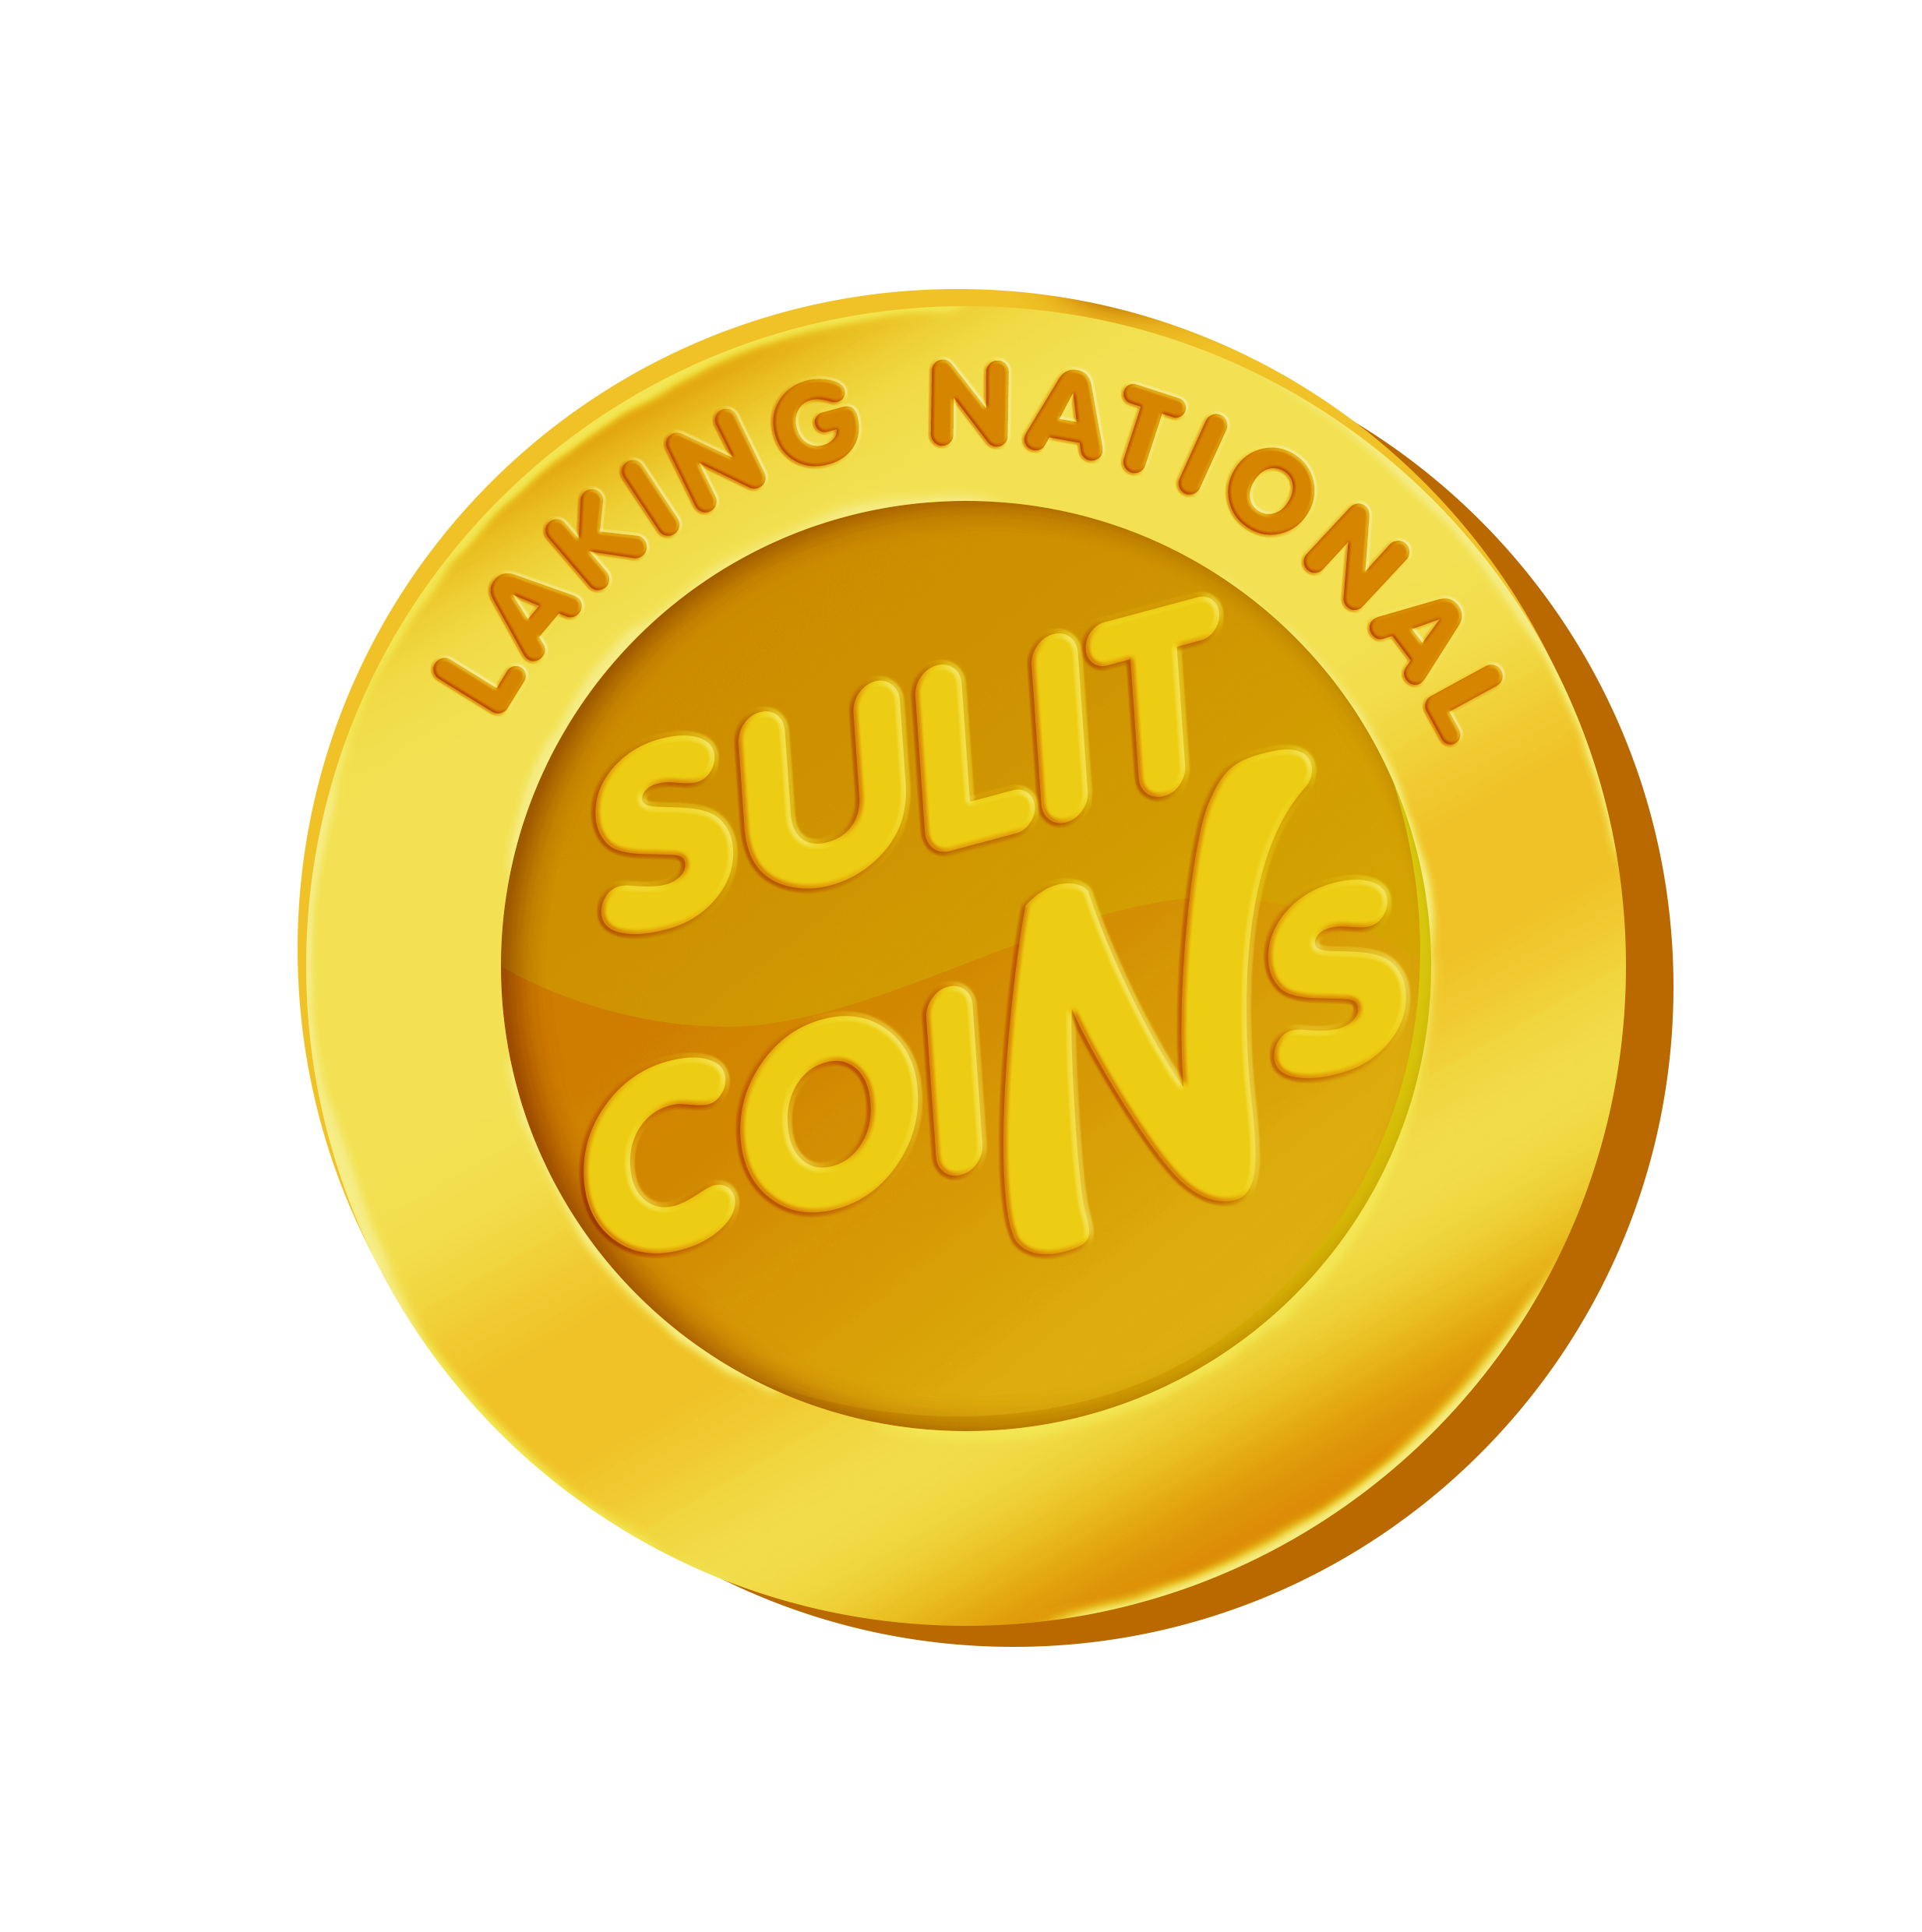 Laking National Coins